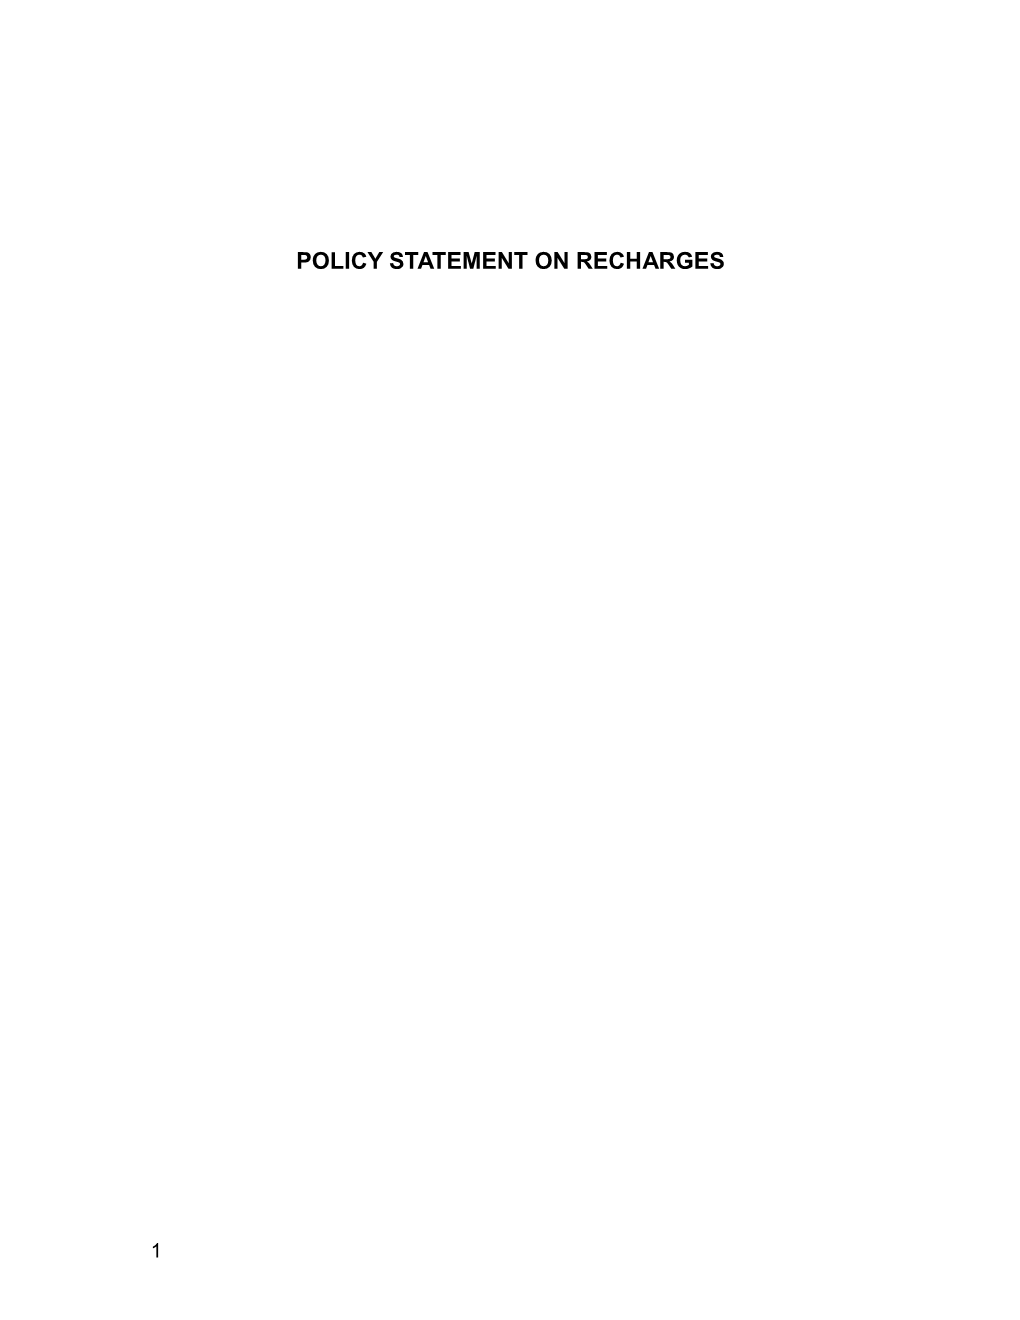 Policy Statement on Rechargeable Repairs and Expenses